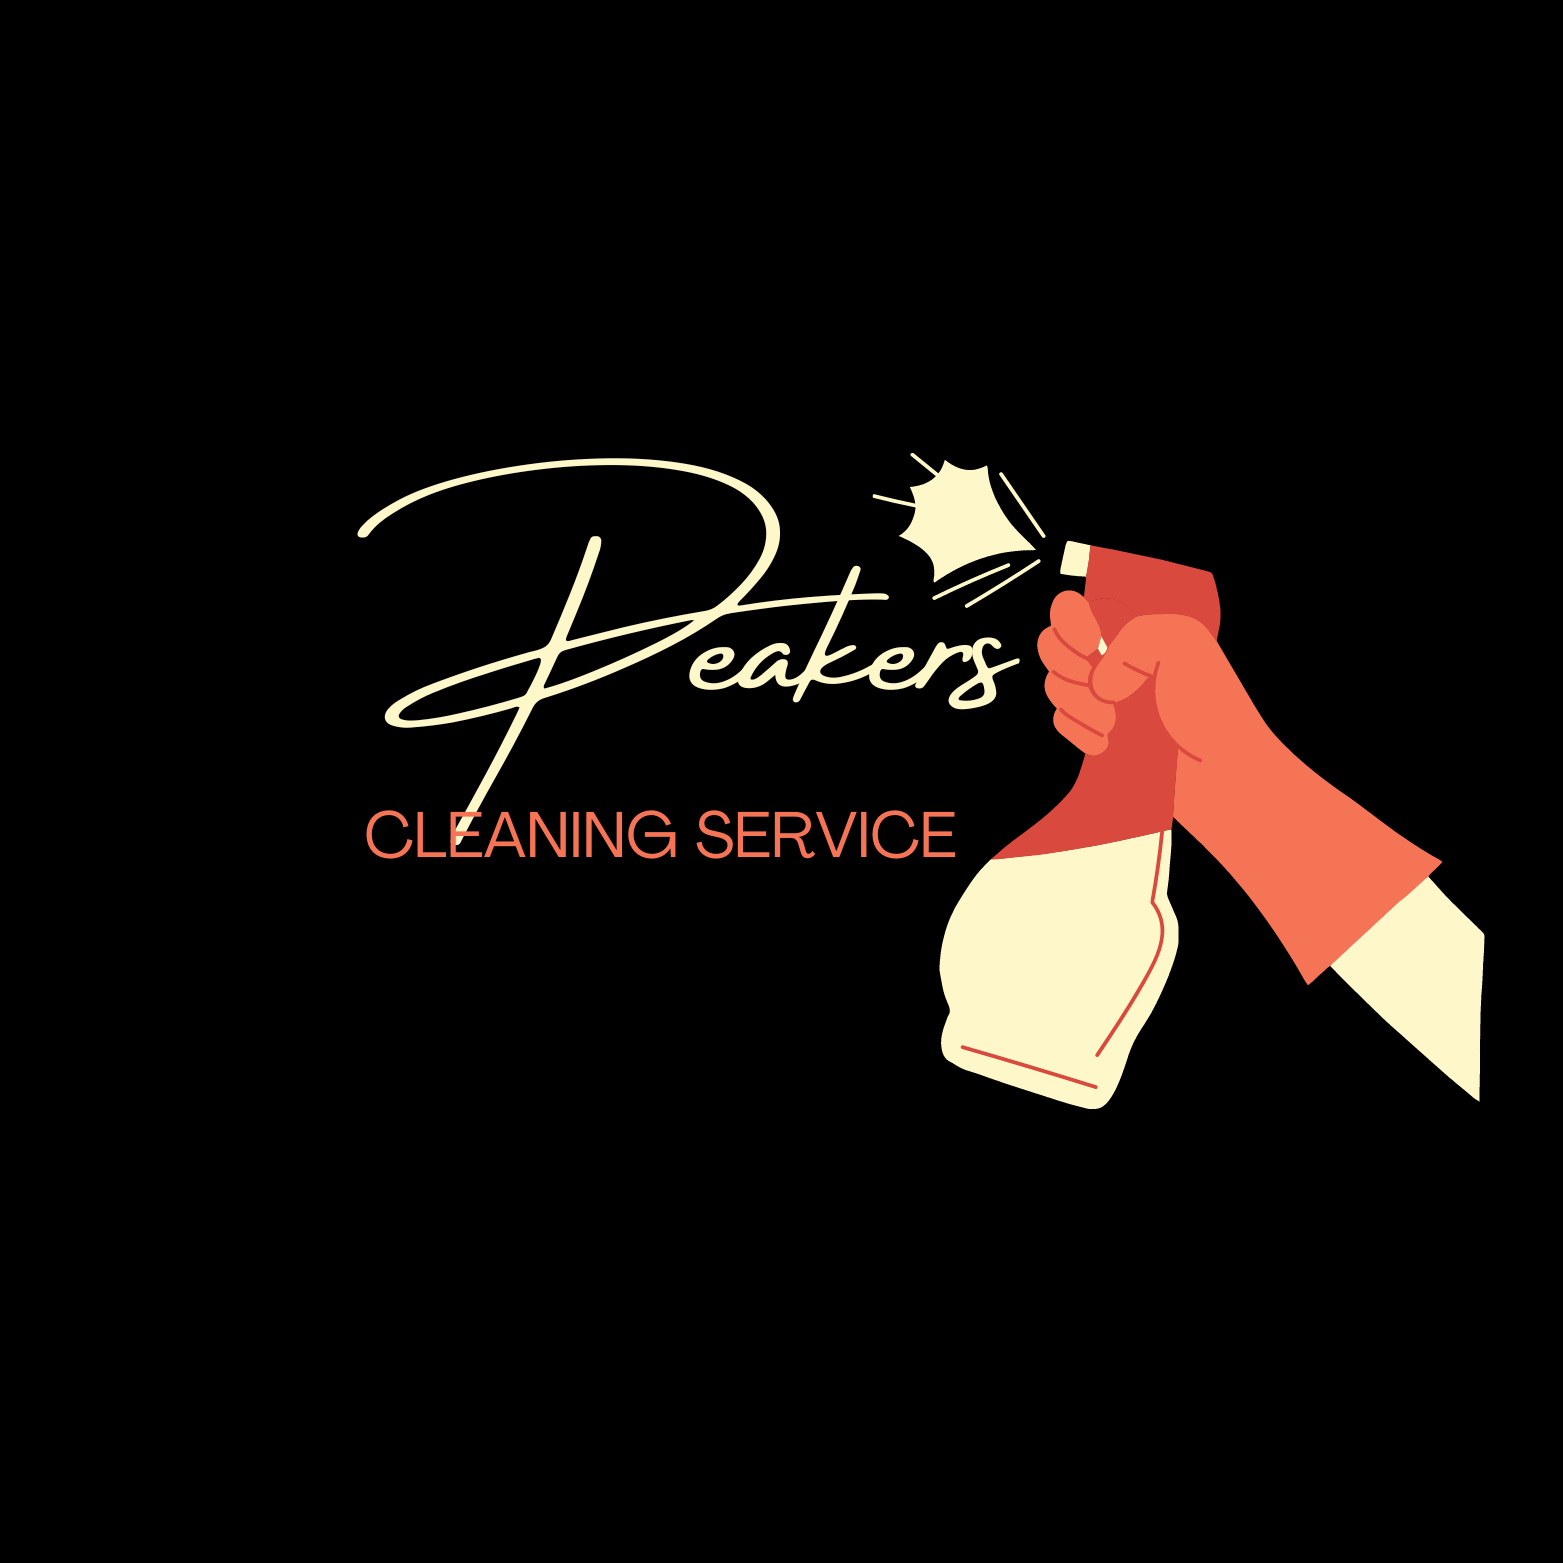 Peakers Cleaning Service Logo